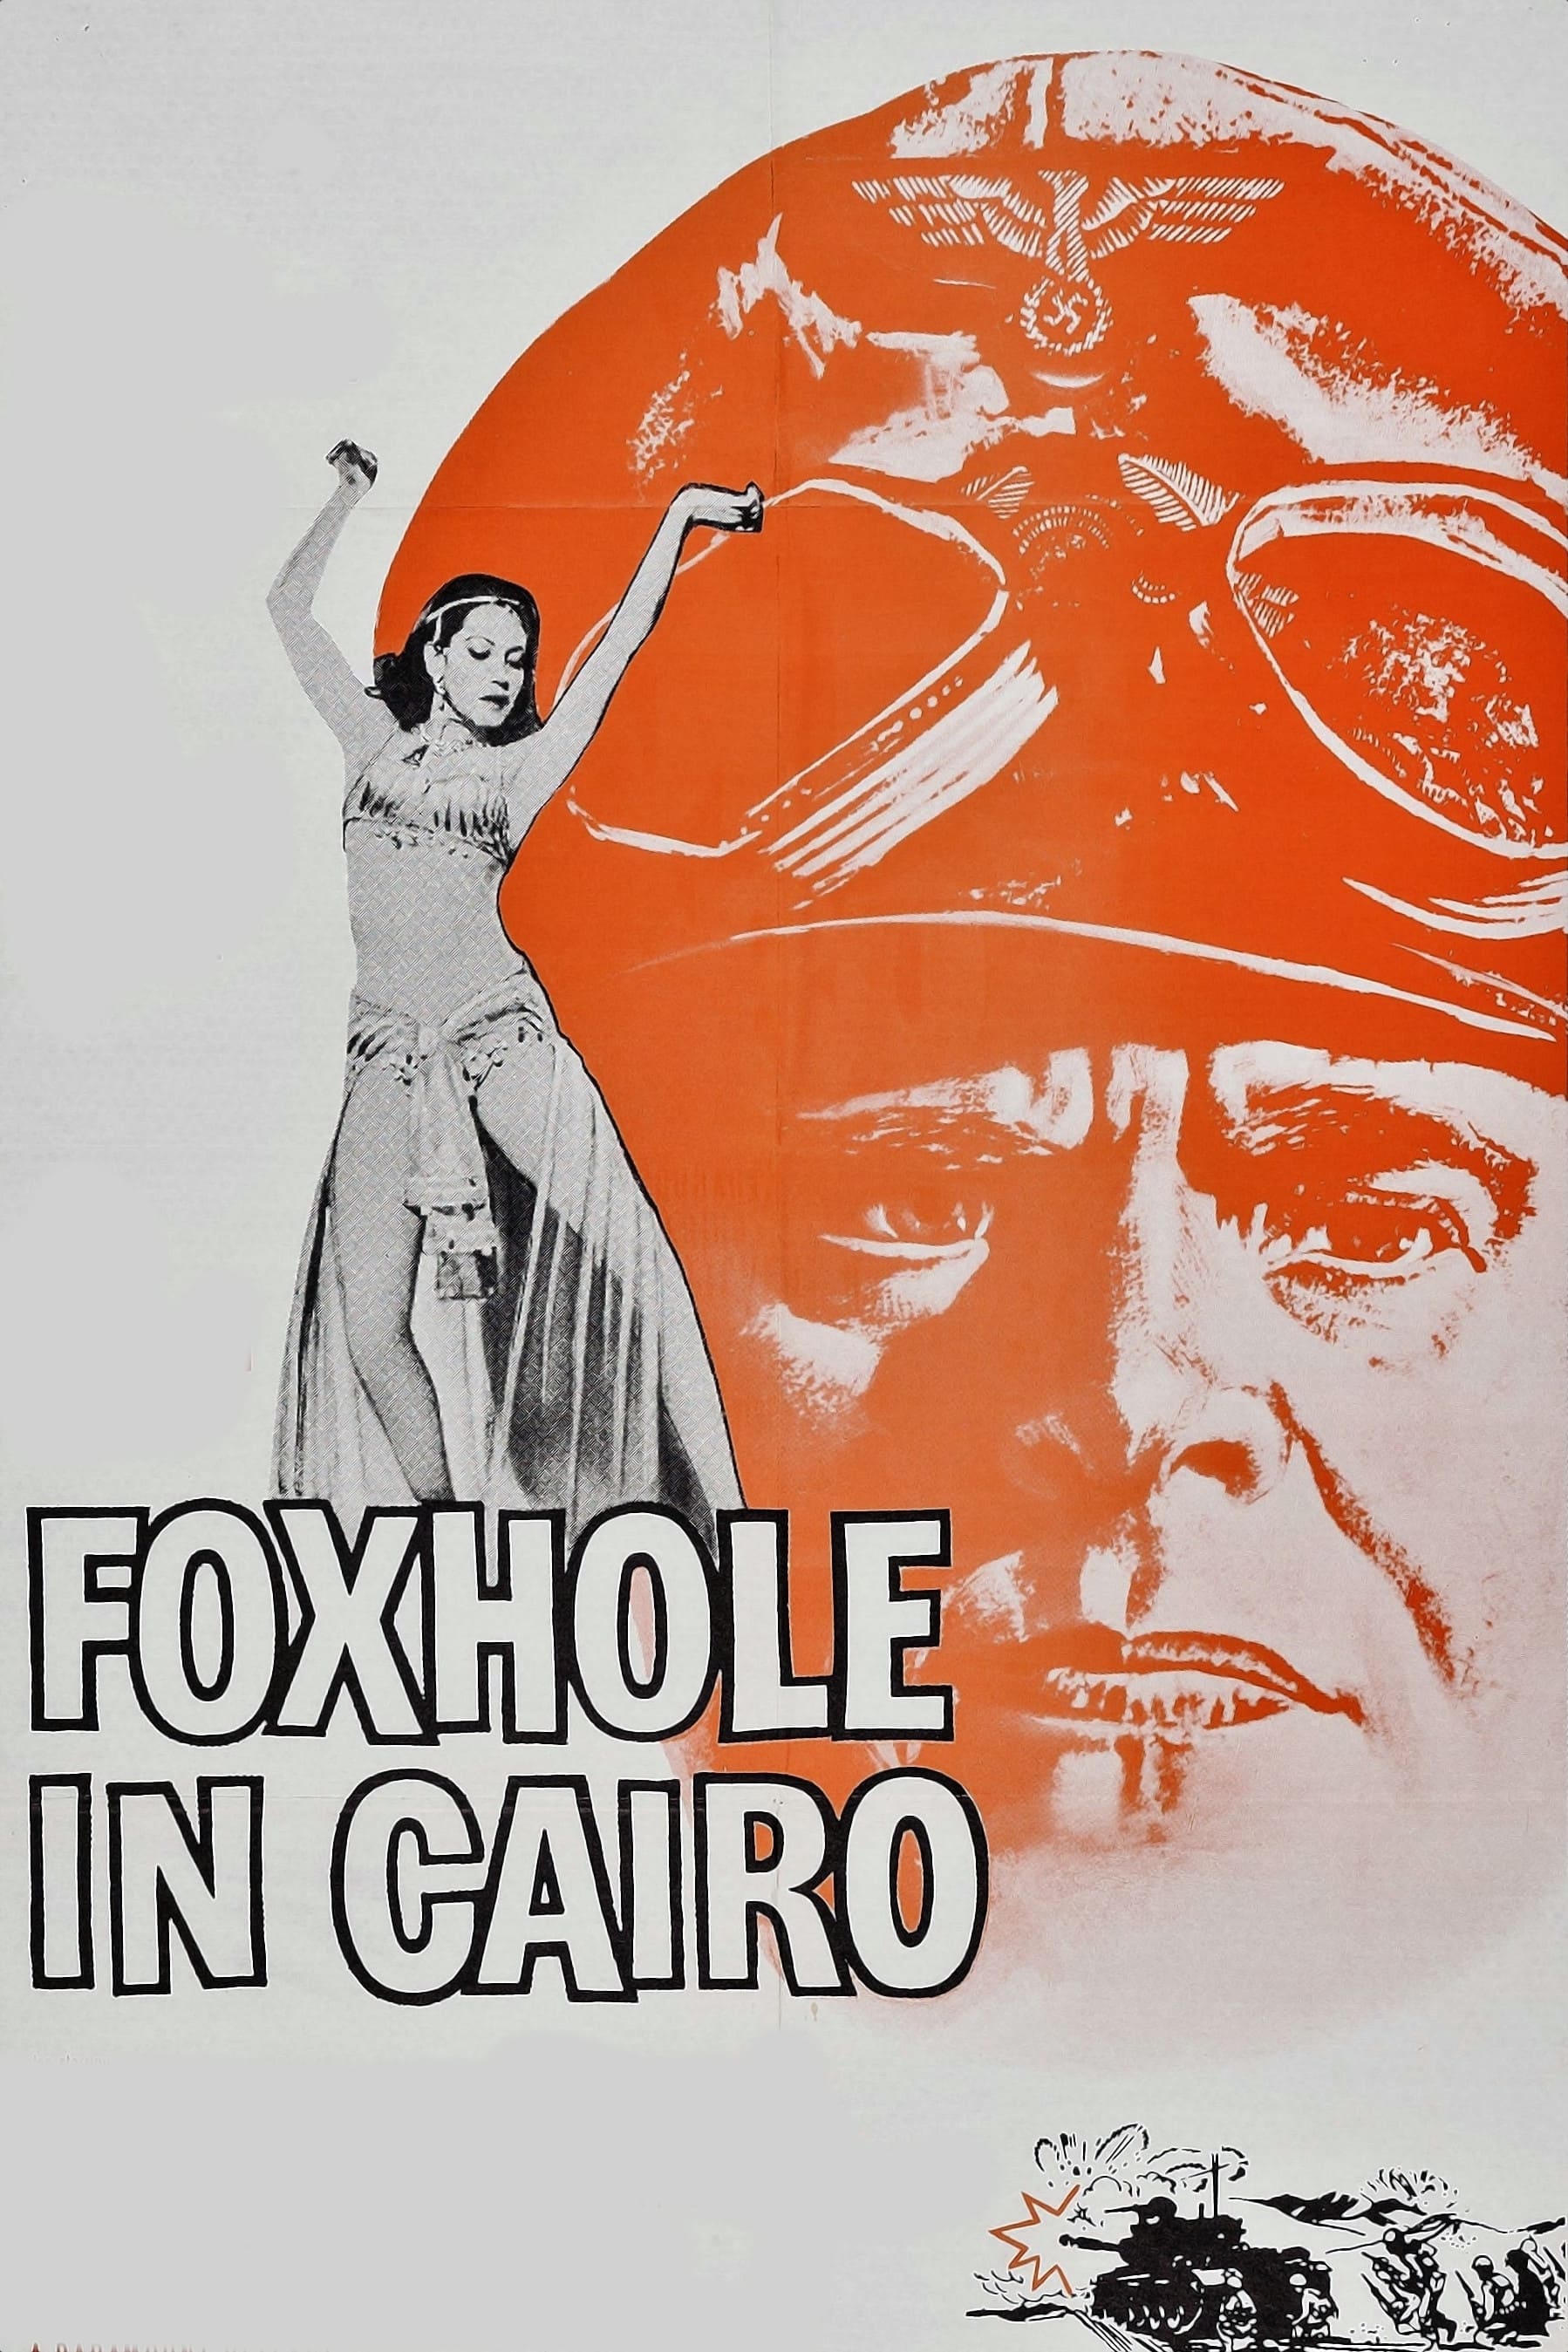 Foxhole in Cairo film